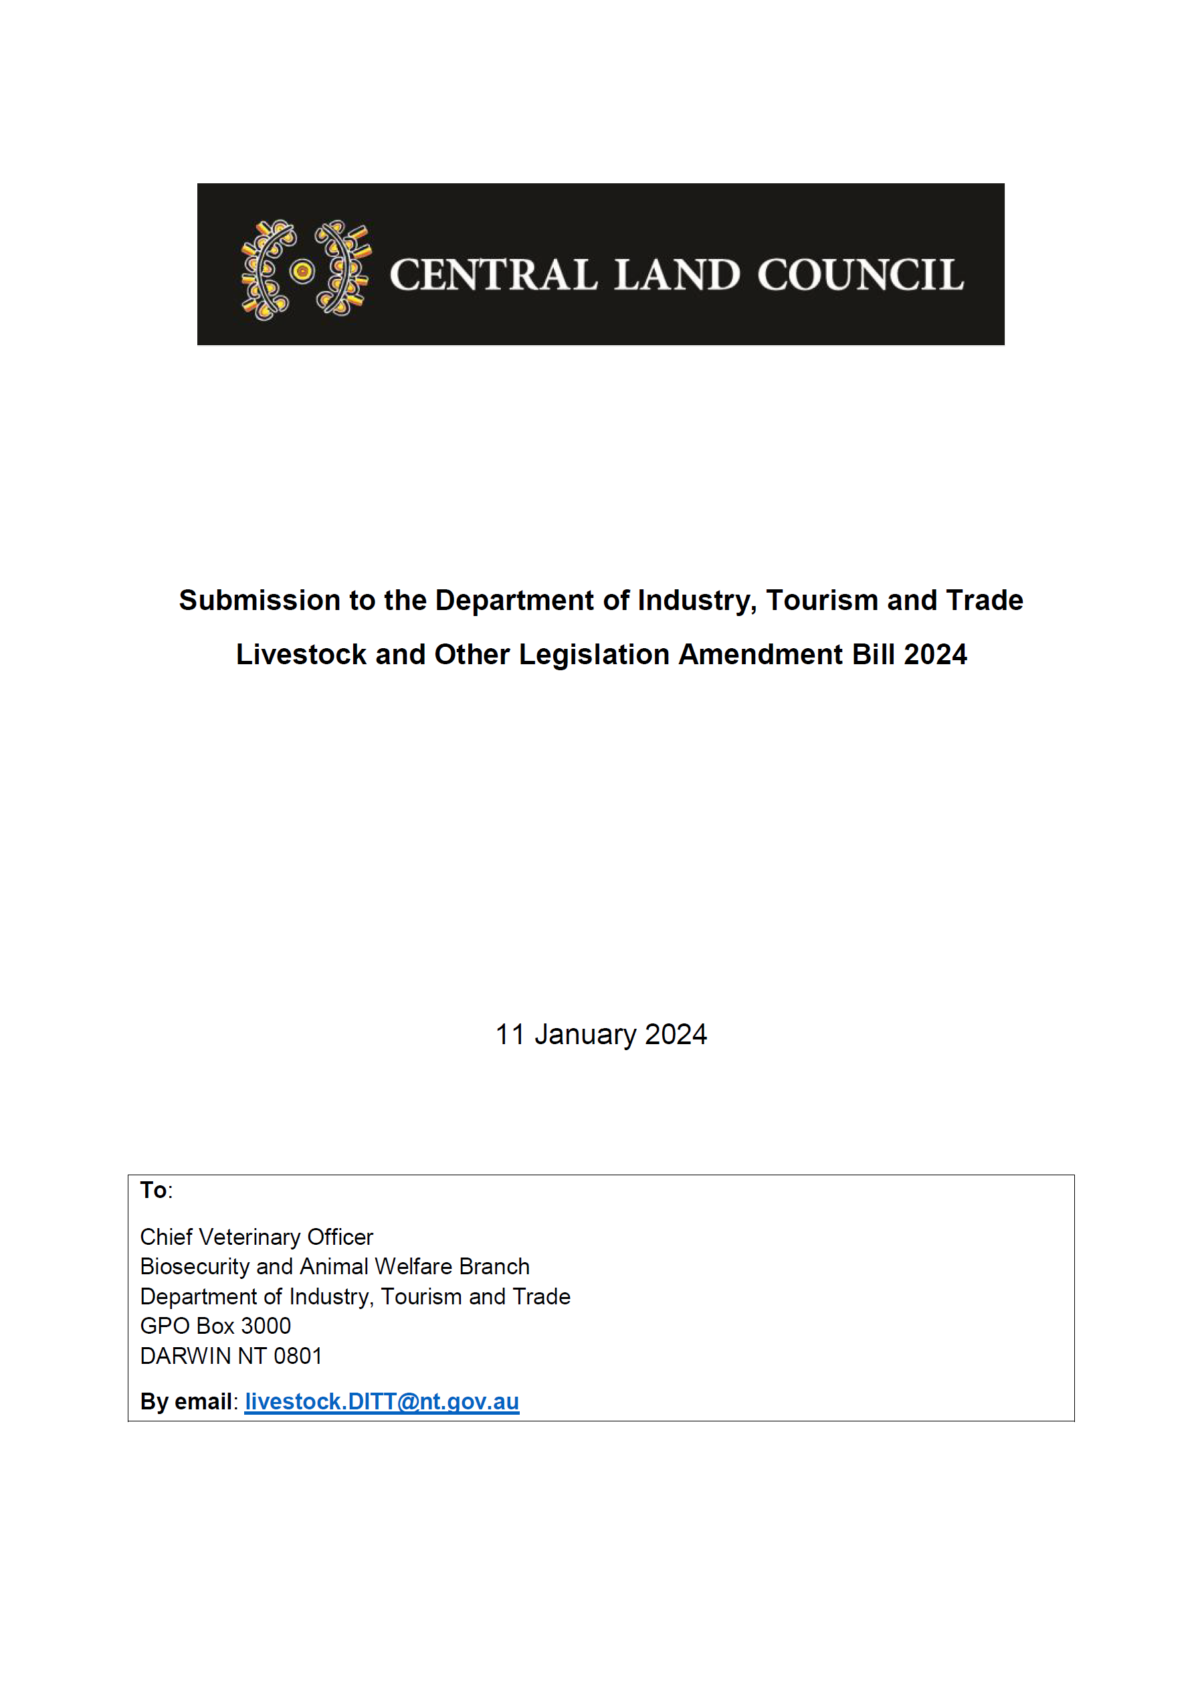 Submission to the Department of Industry, Tourism and Trade Livestock and Other Legislation Amendment Bill 2024